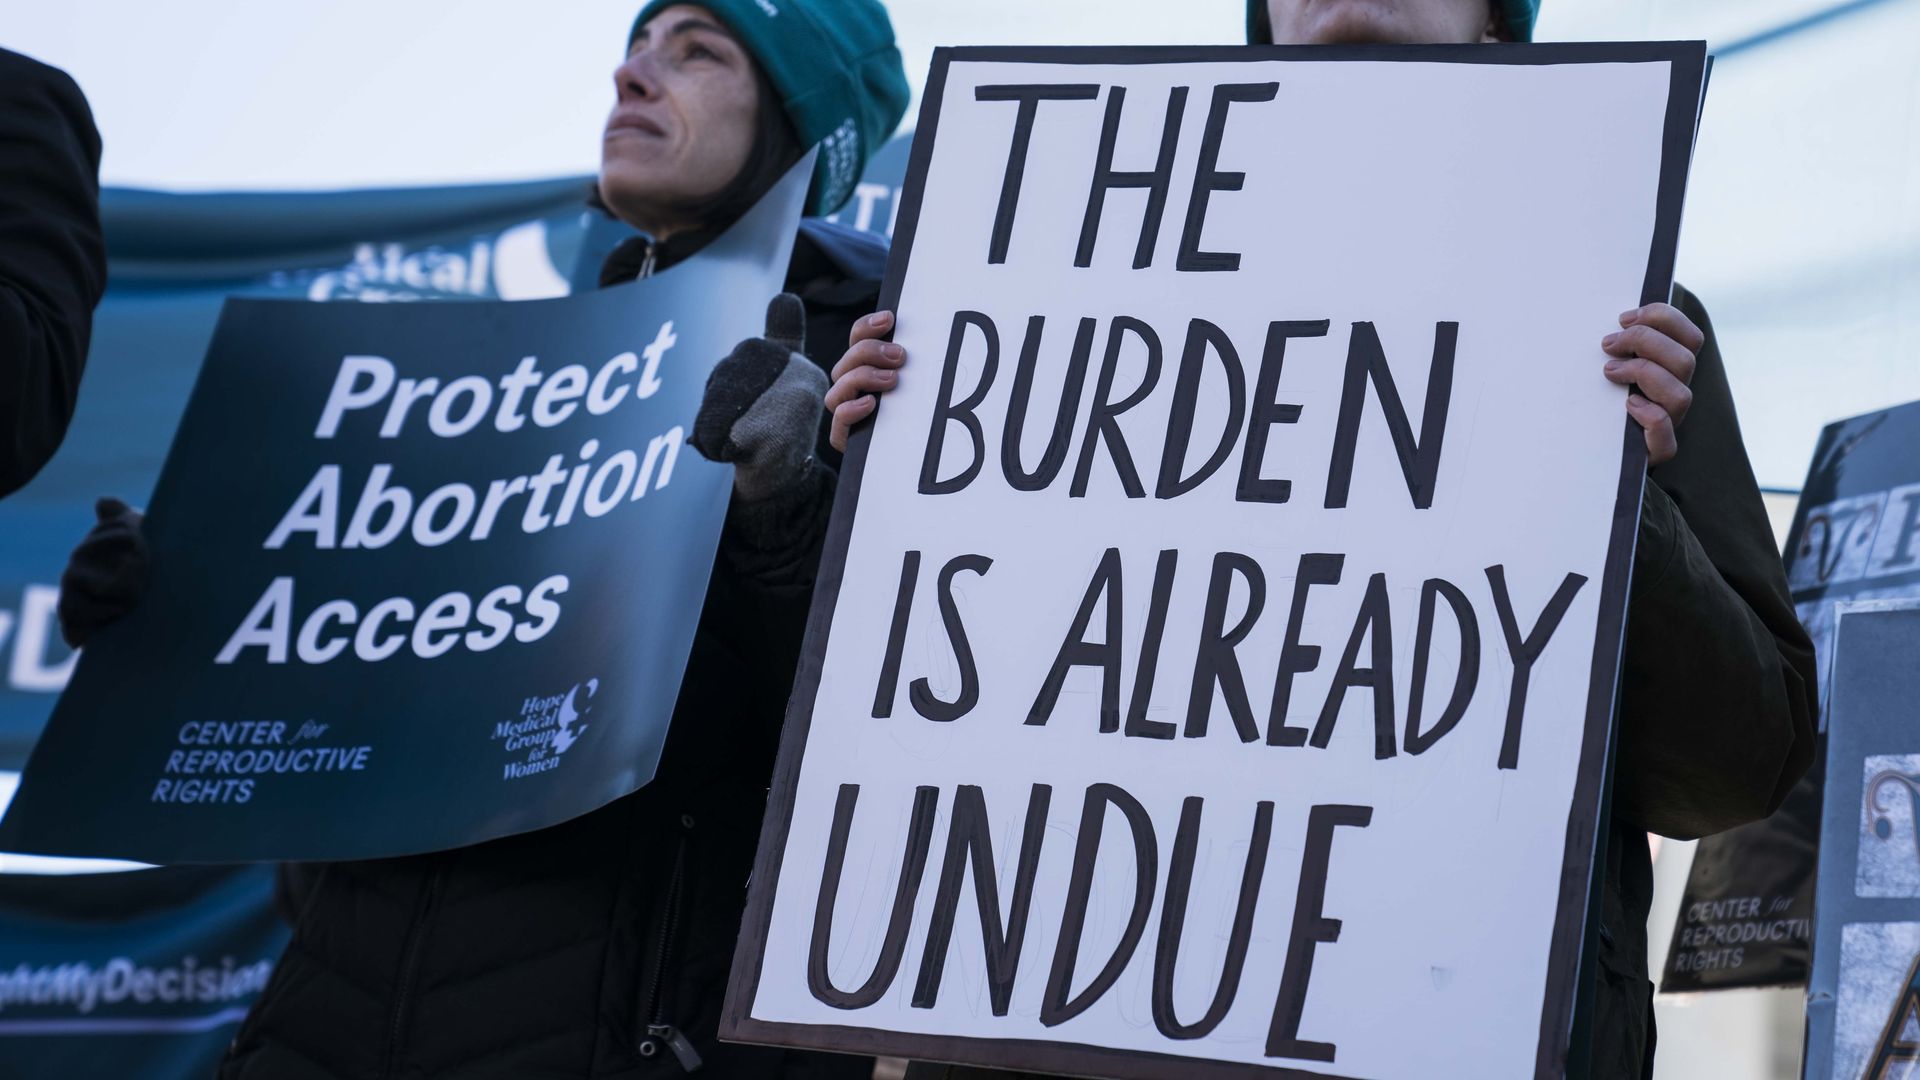 Photo of a person holding a sign that says "The burden is already undue" and another person holding a sign that says "Protect abortion access"